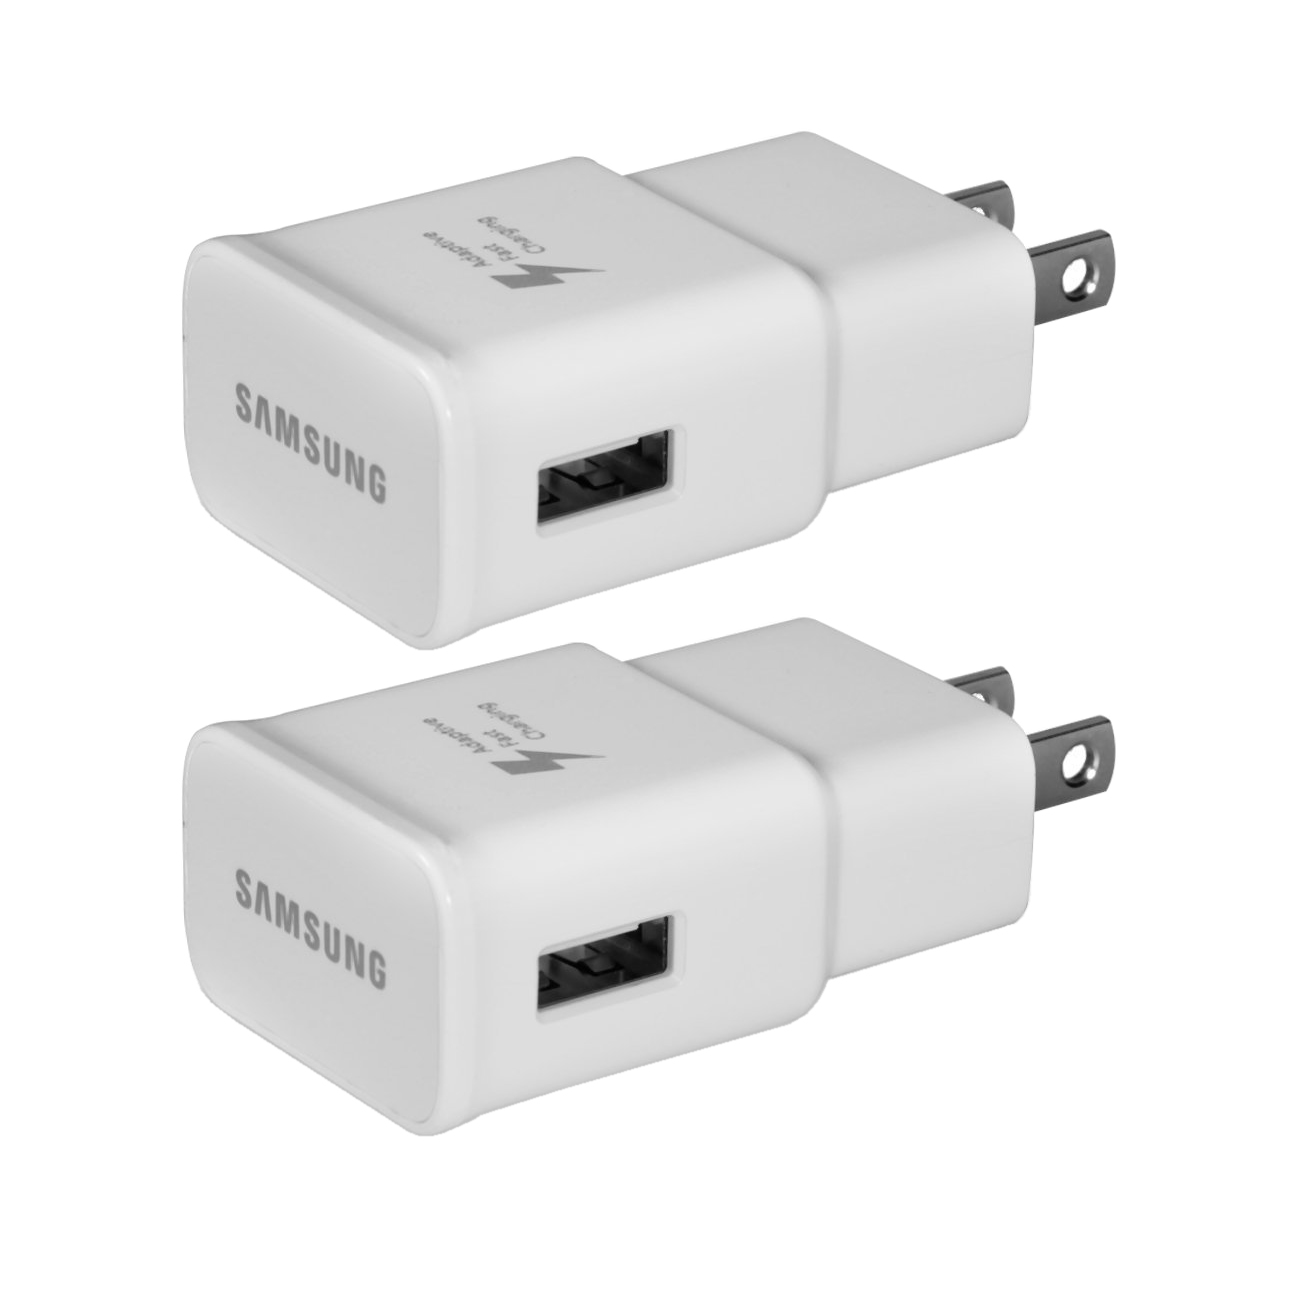 2-pack Samsung original USB quick charge wall adapters for $8